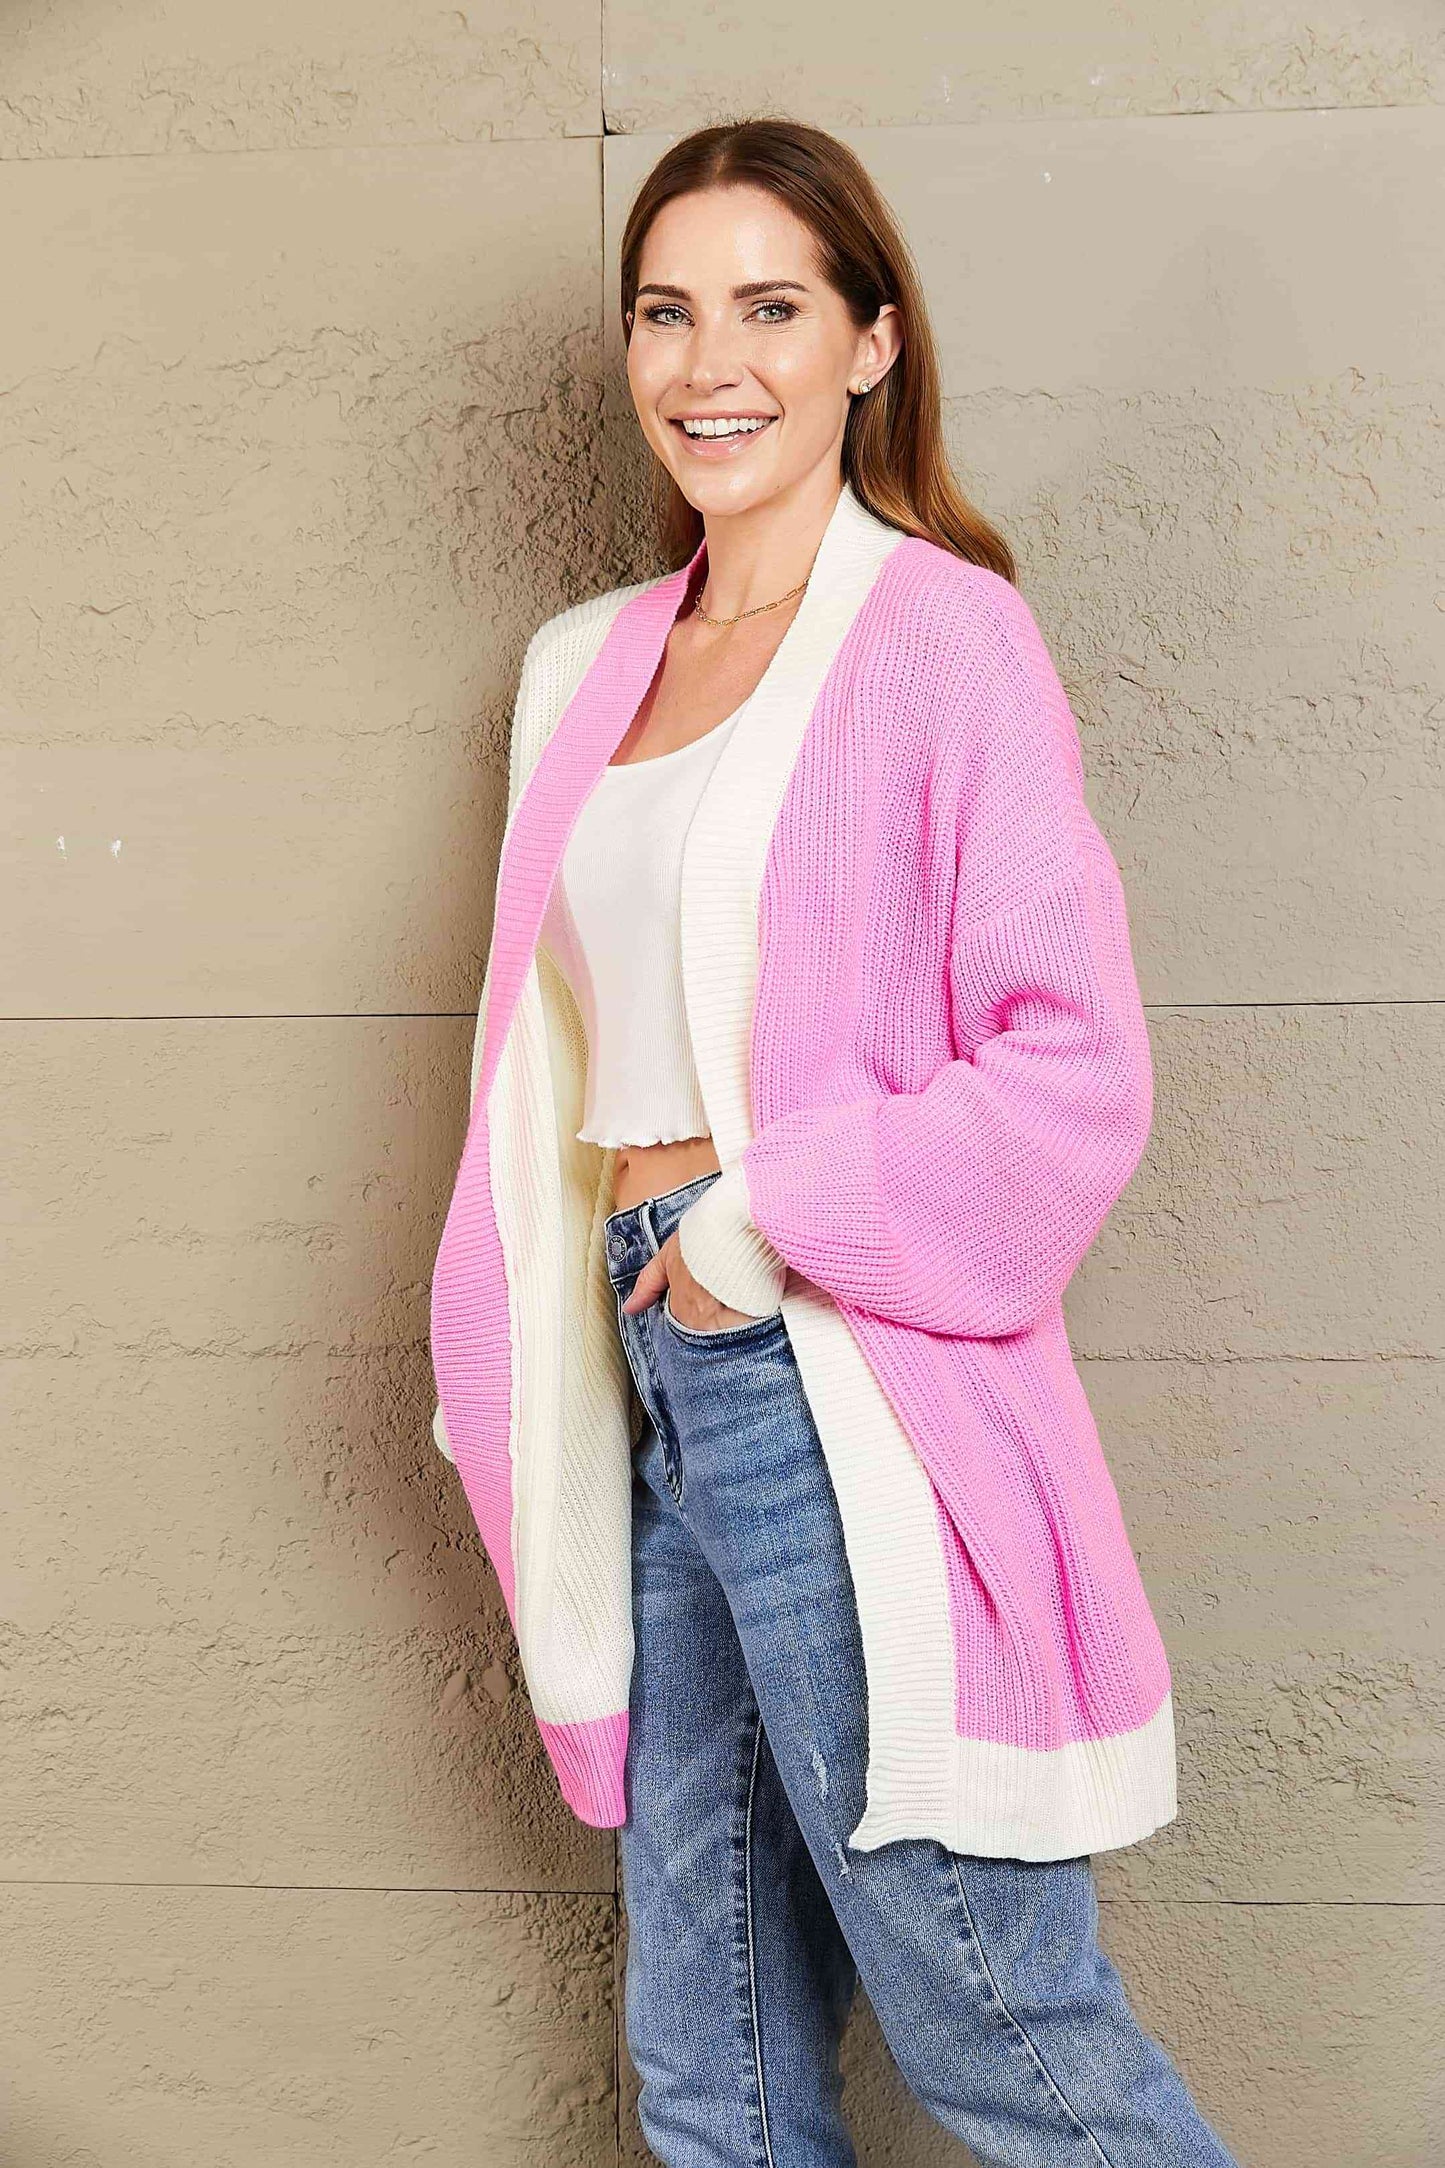 Woven Right Contrast Open Front Dropped Shoulder Longline Cardigan